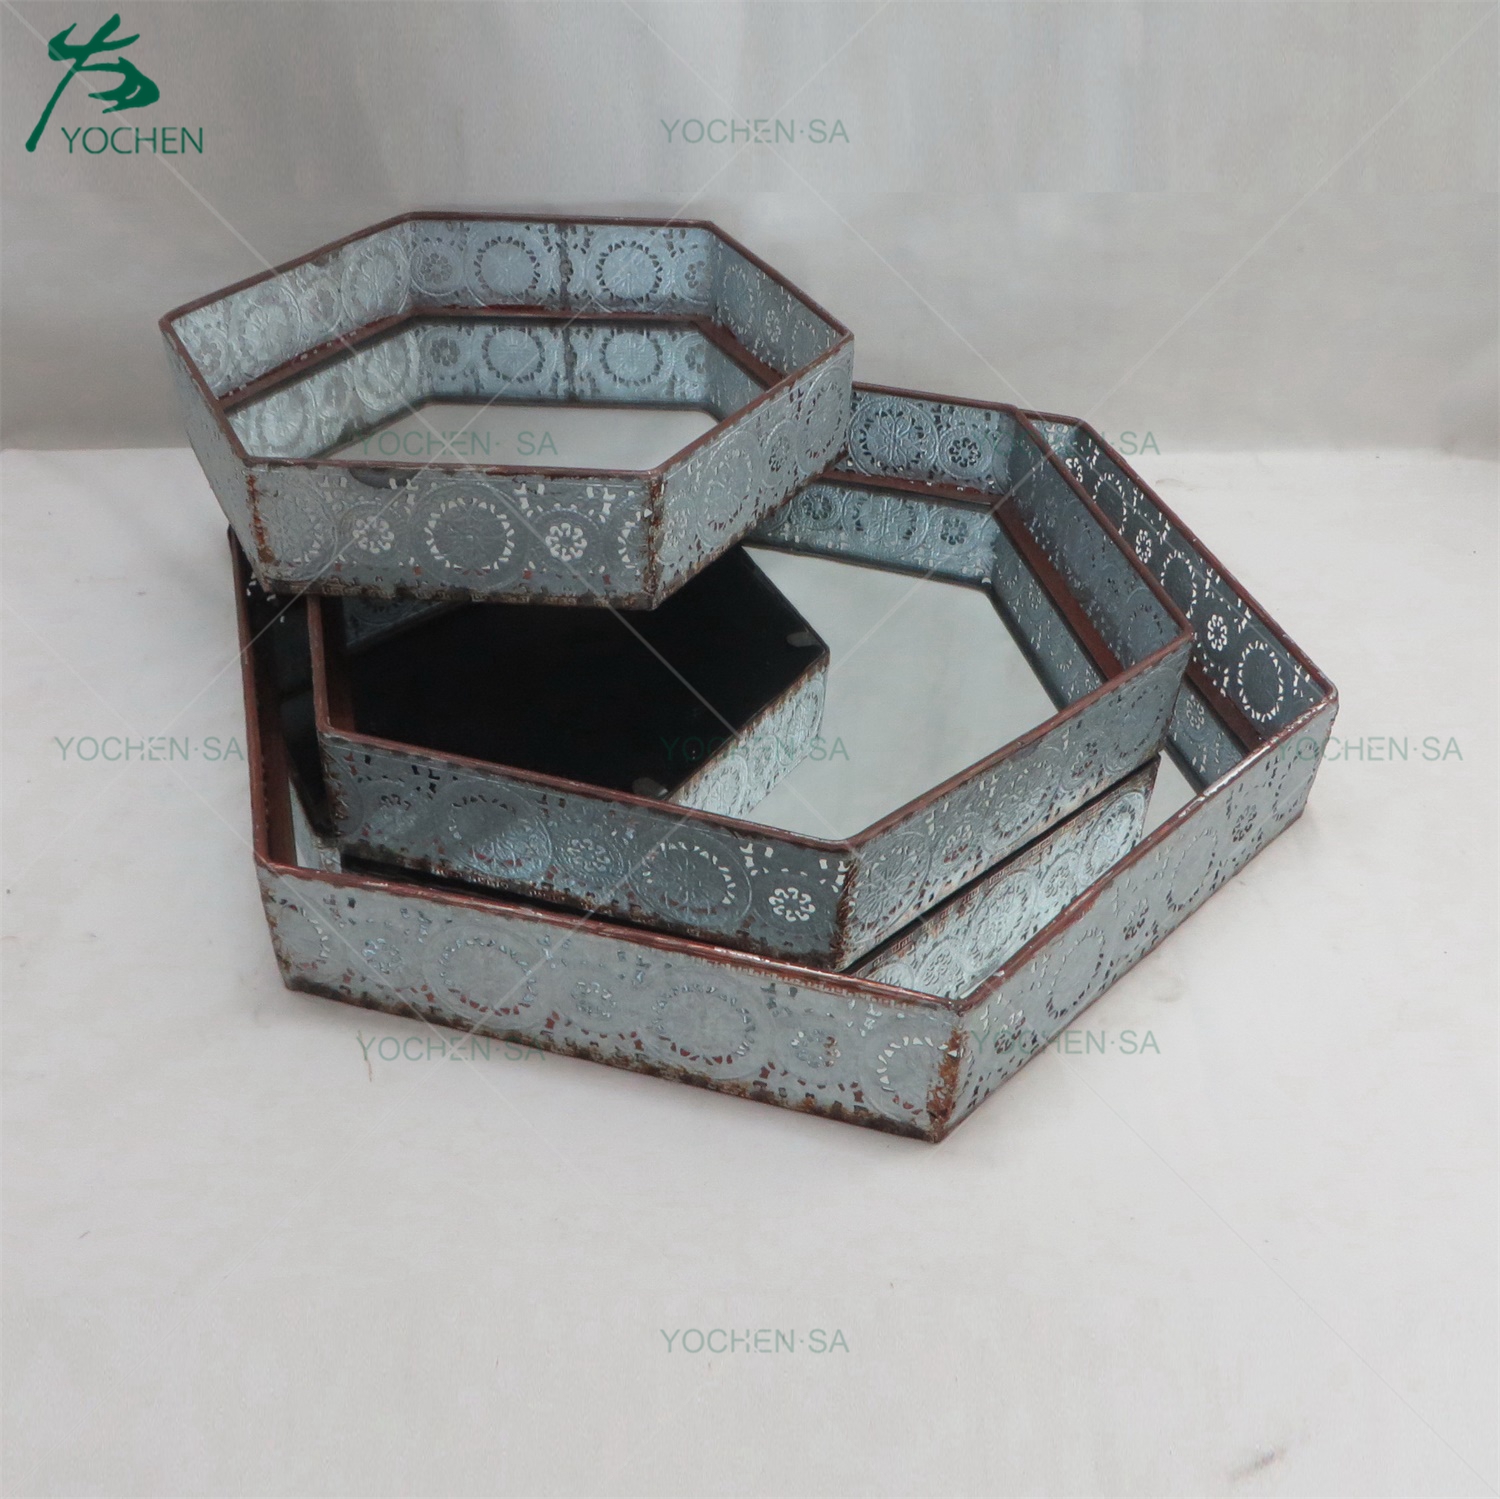 Sexangle Shaped Metal Mirrored Serving Tray Home Decorative Tray